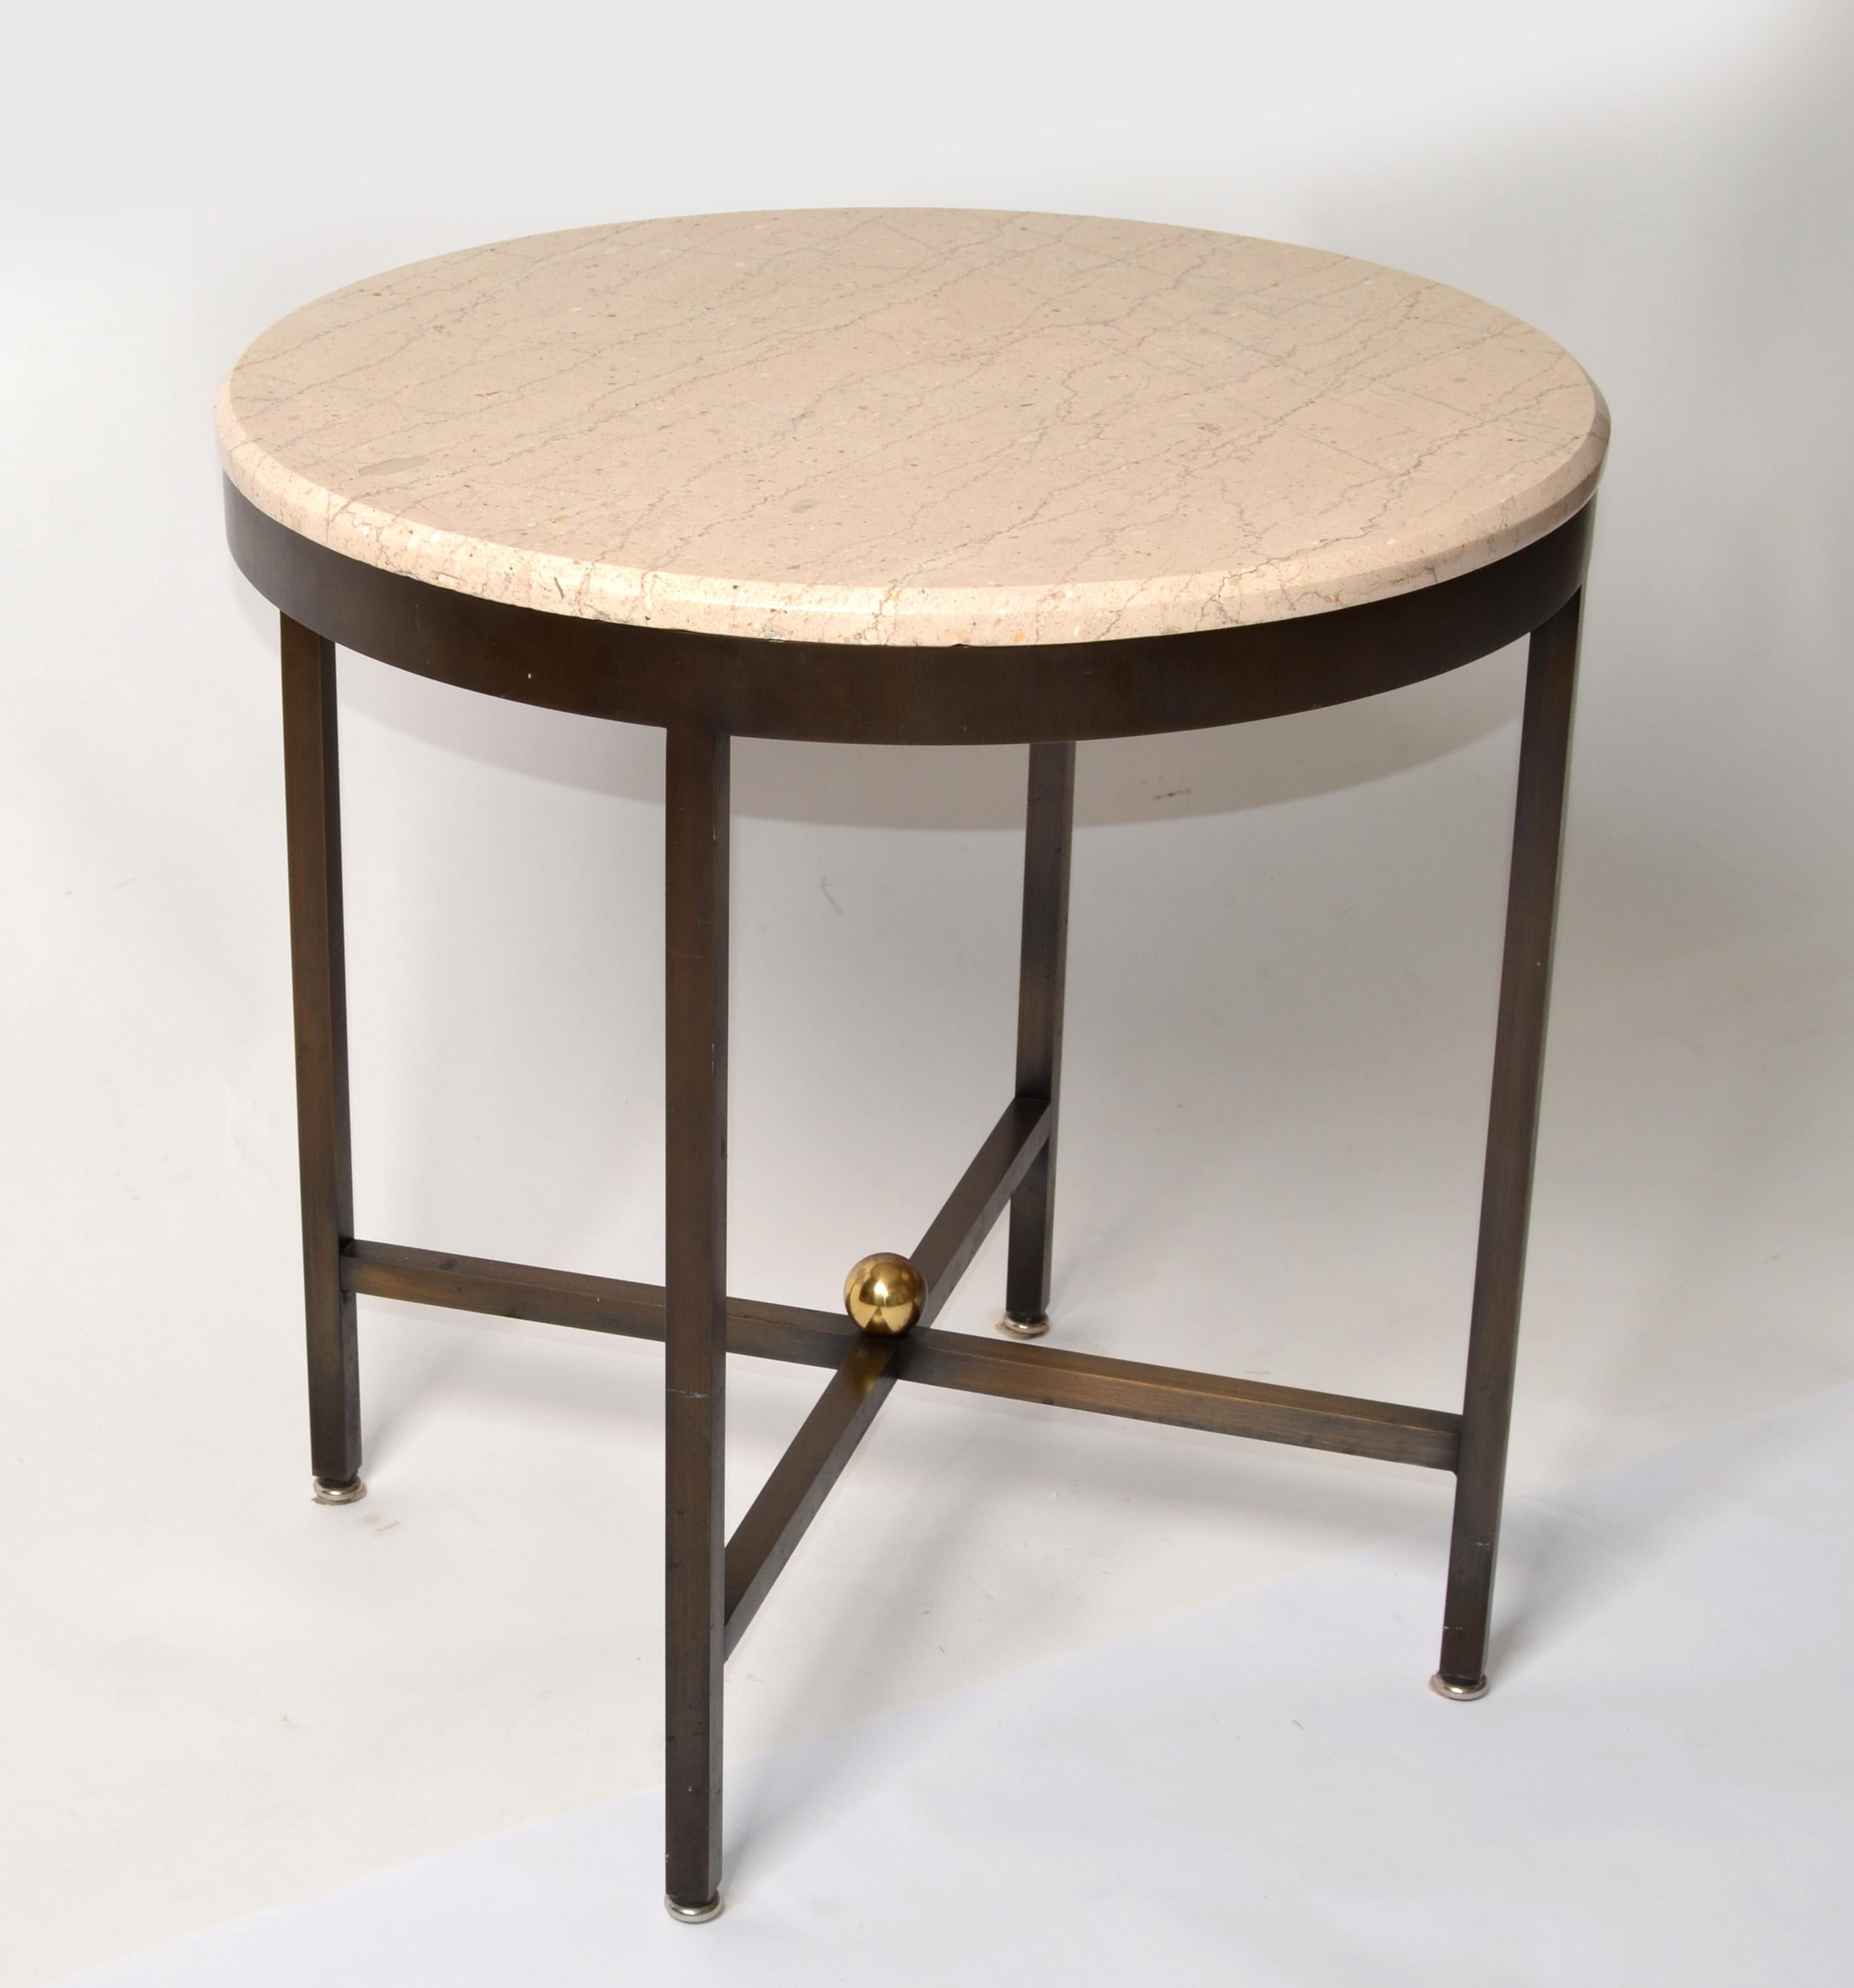 Mid-20th Century Italian Bronze Brass Beveled Round Tan Stone Top Side Table  In Good Condition For Sale In Miami, FL